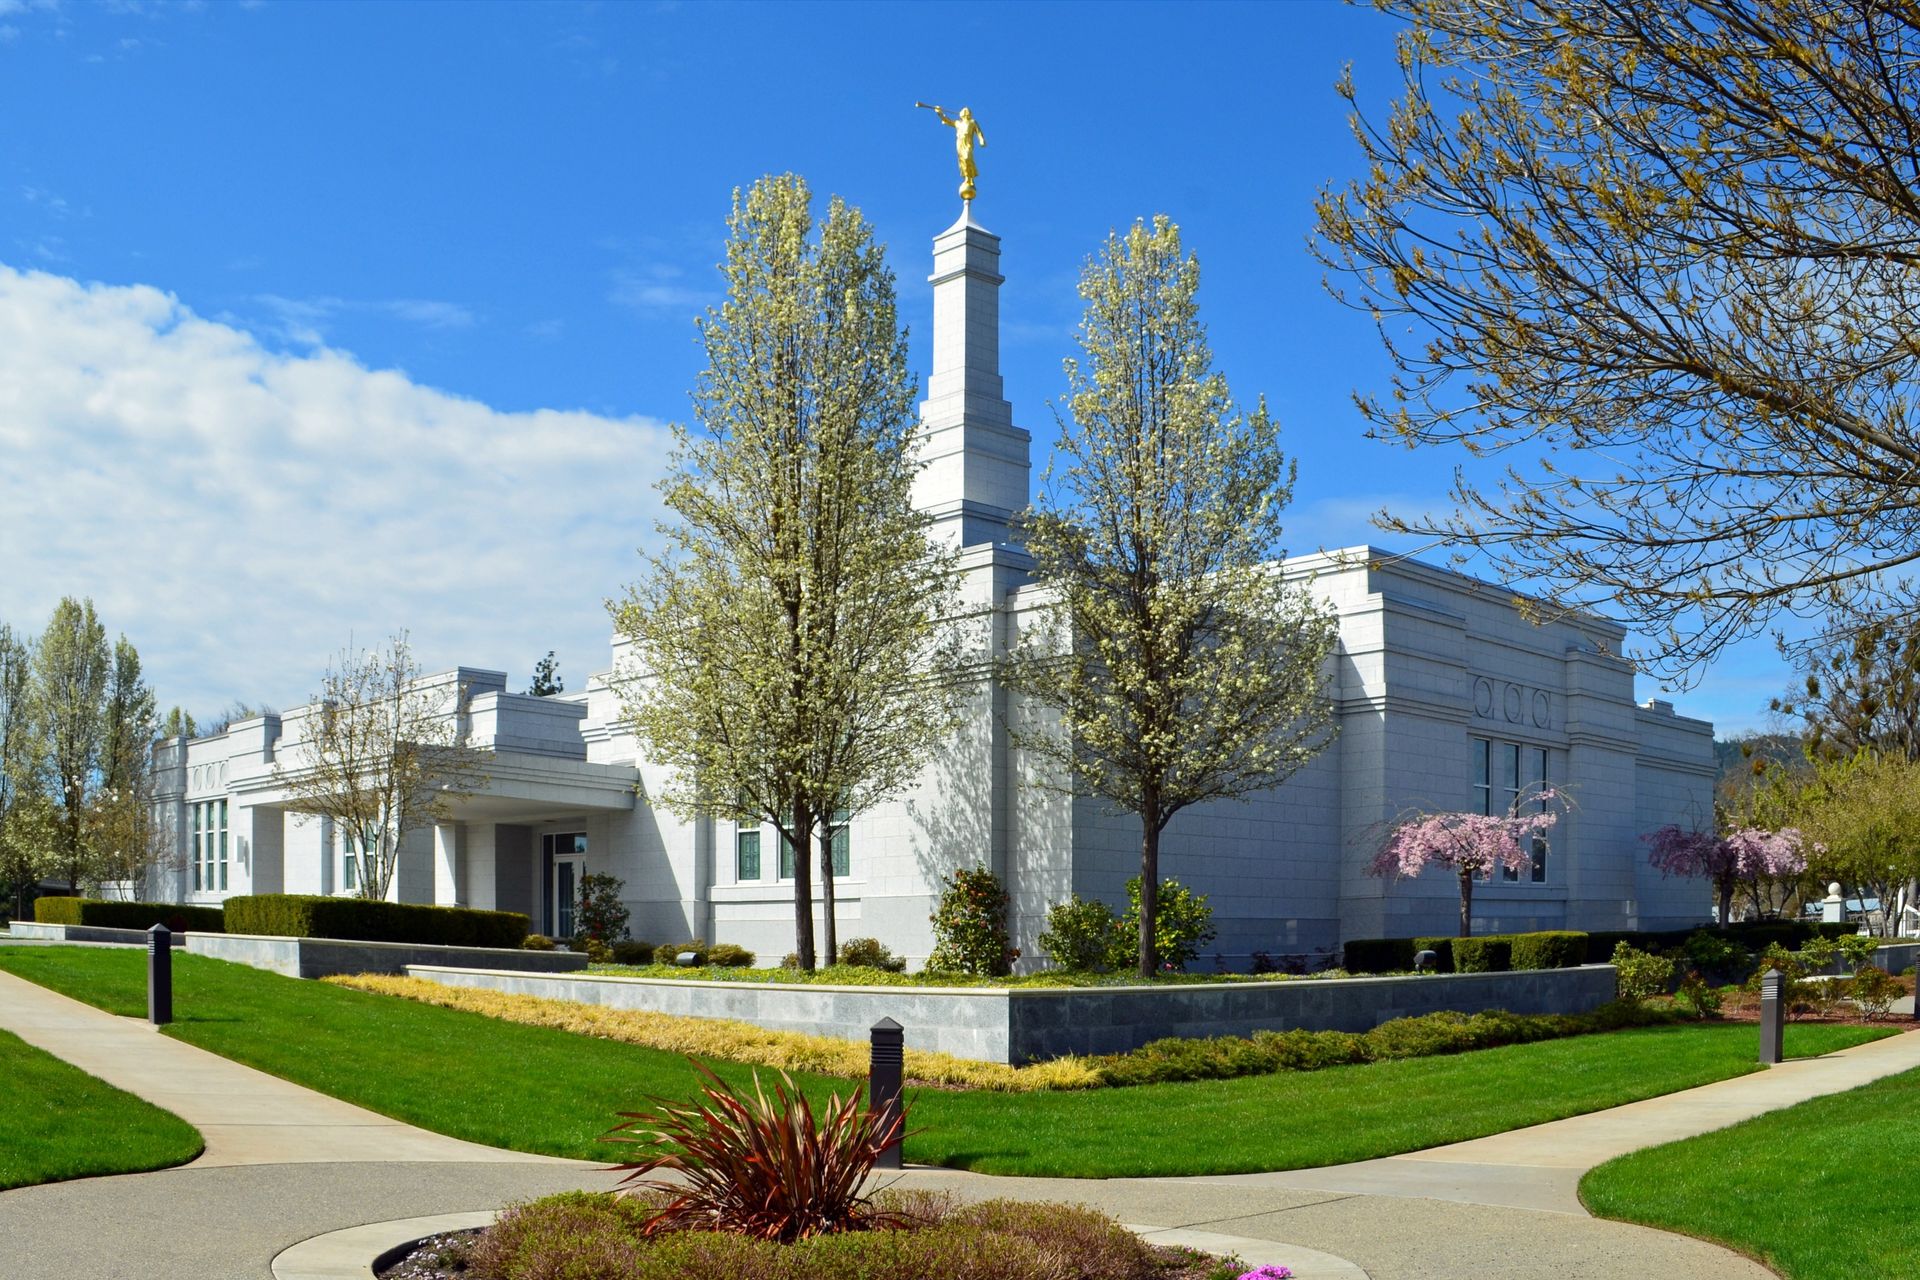 The Medford Oregon Temple side view, including scenery and entrance.